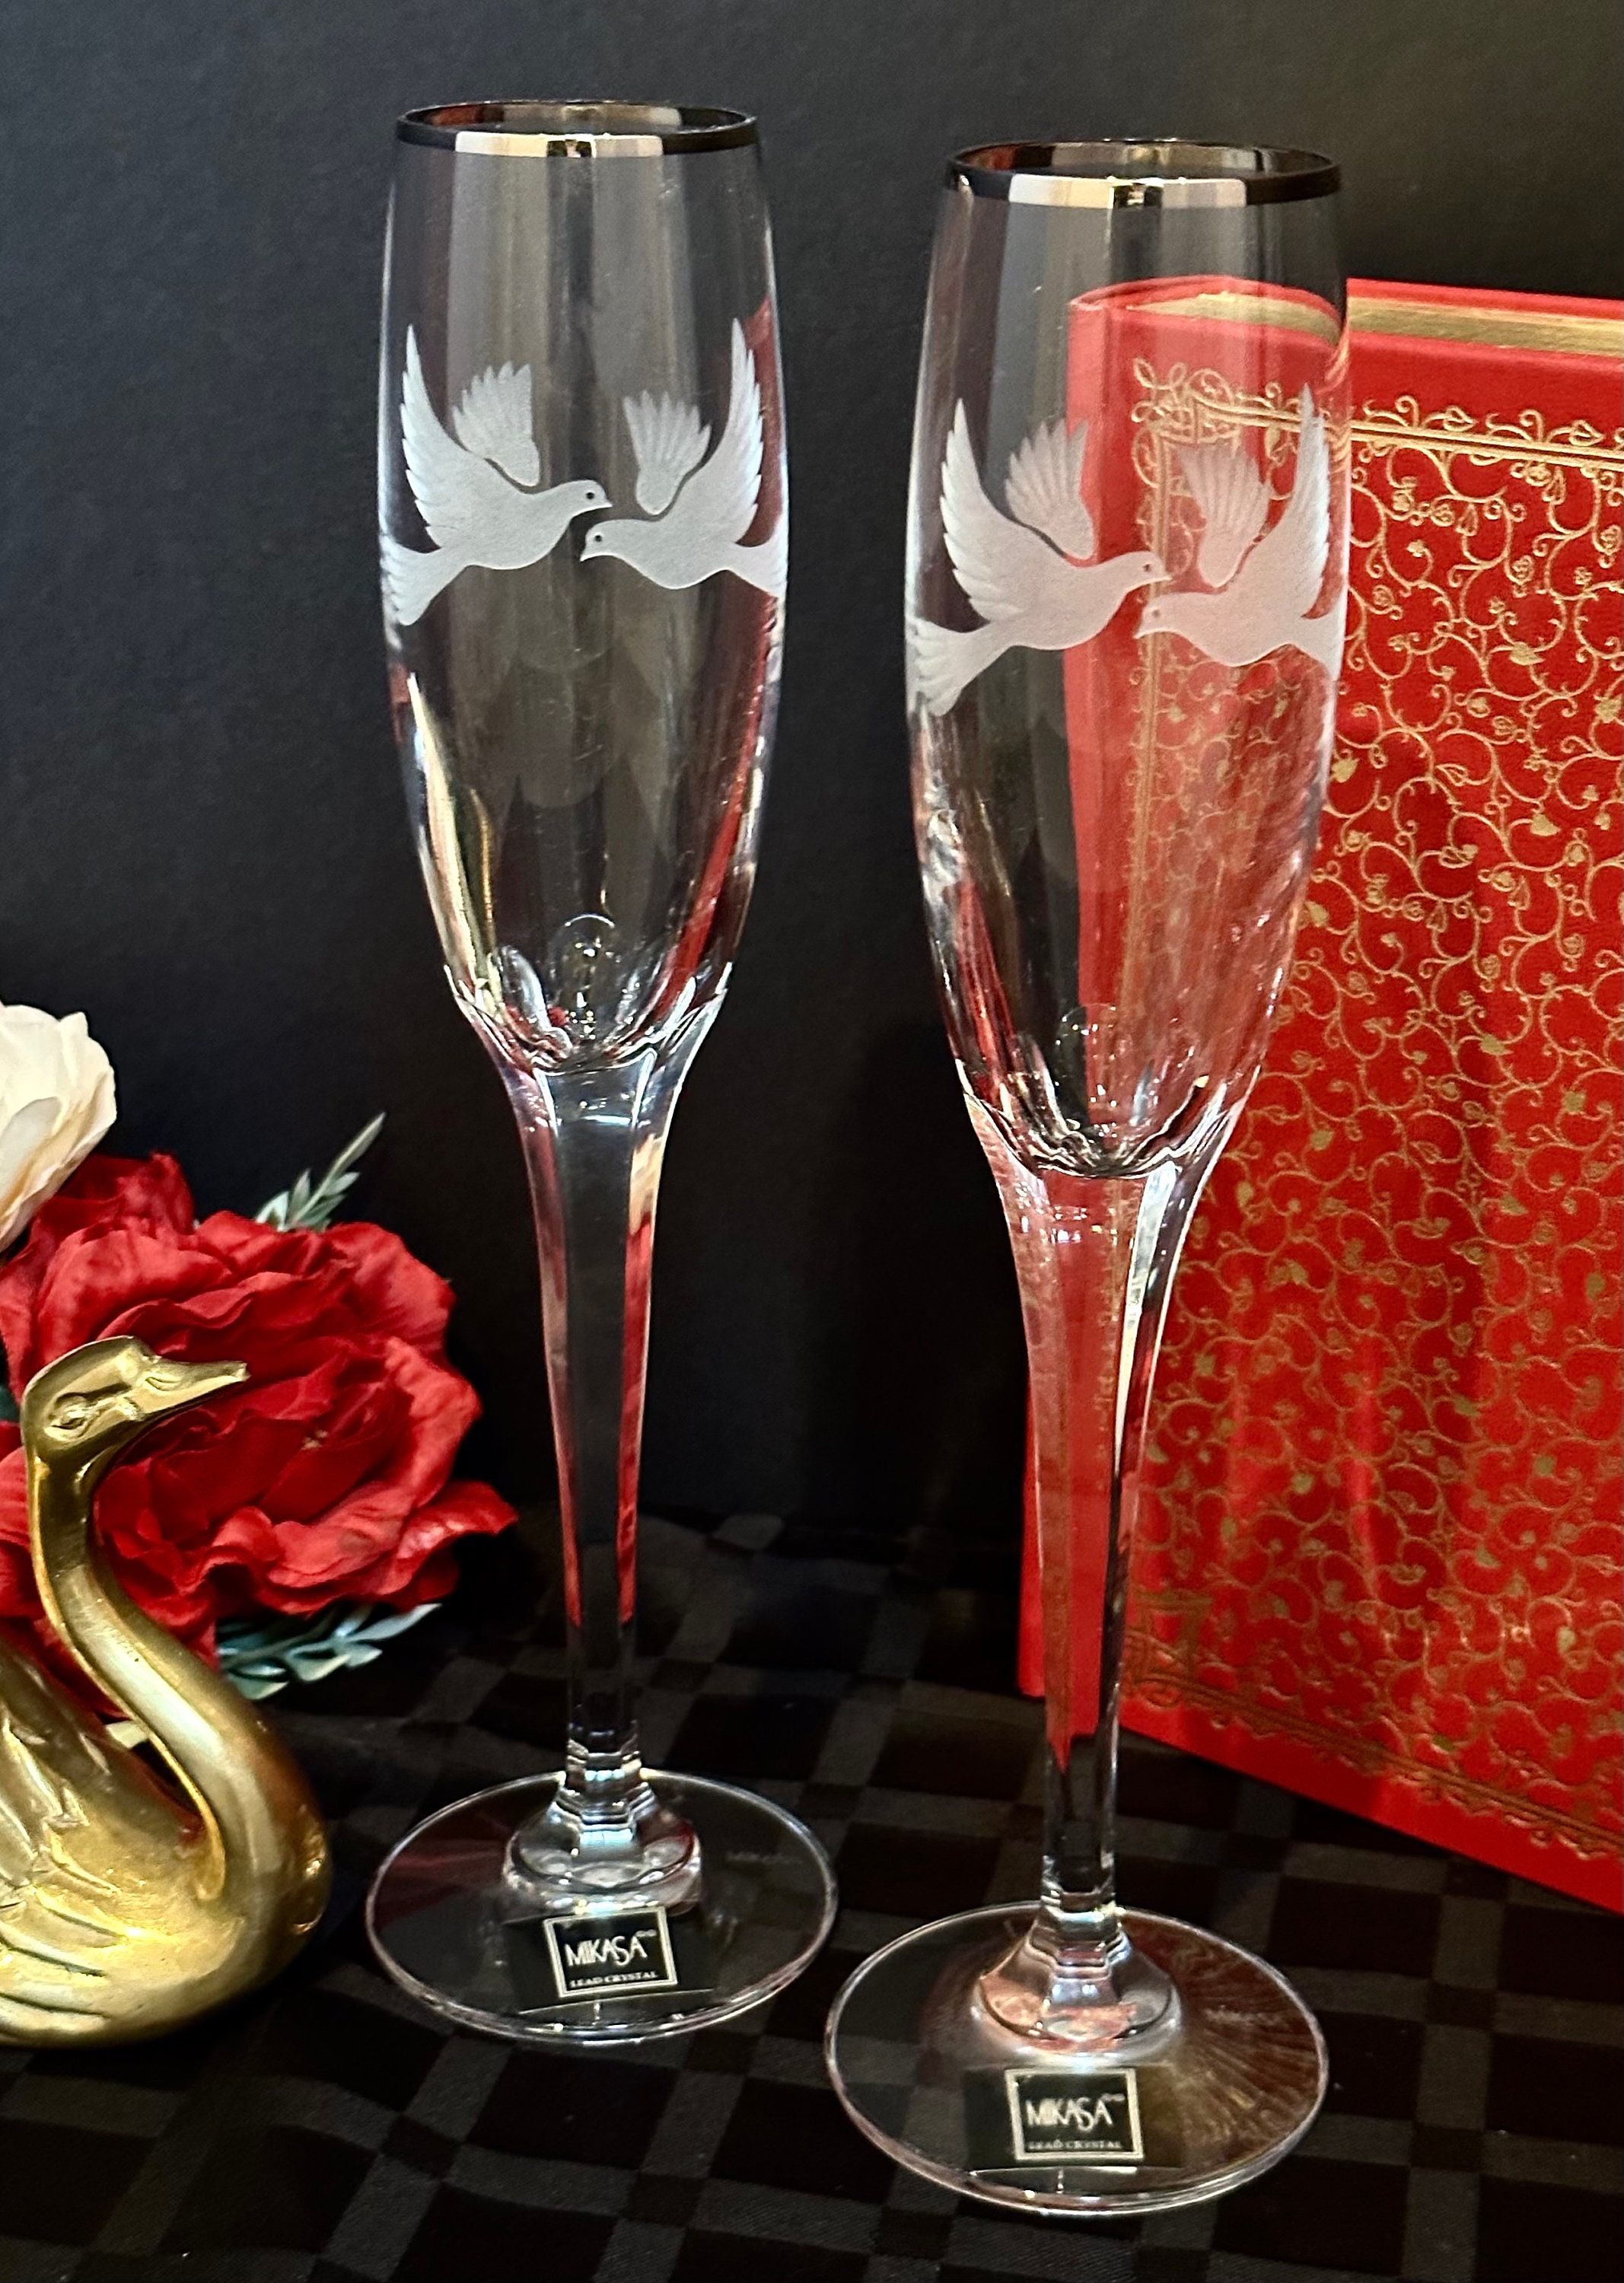 Champagne Flutes Flame d'Amore Mikasa Cut Crystal Wedding Toasting